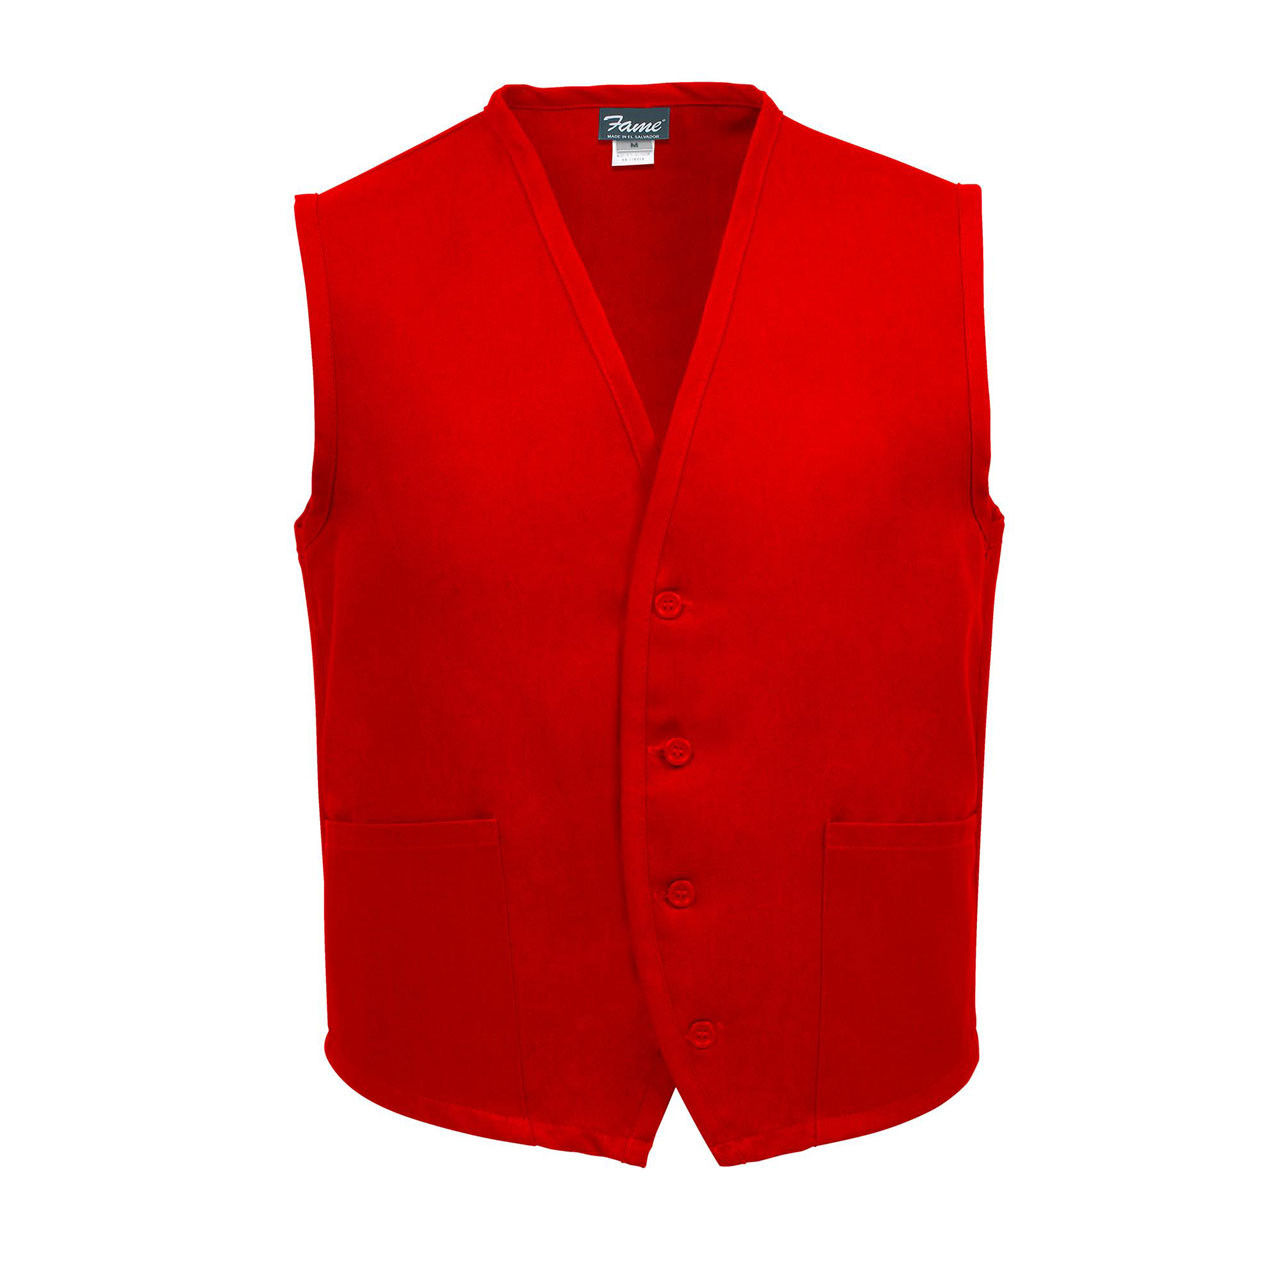 What are the key features of the closure on the red vest?